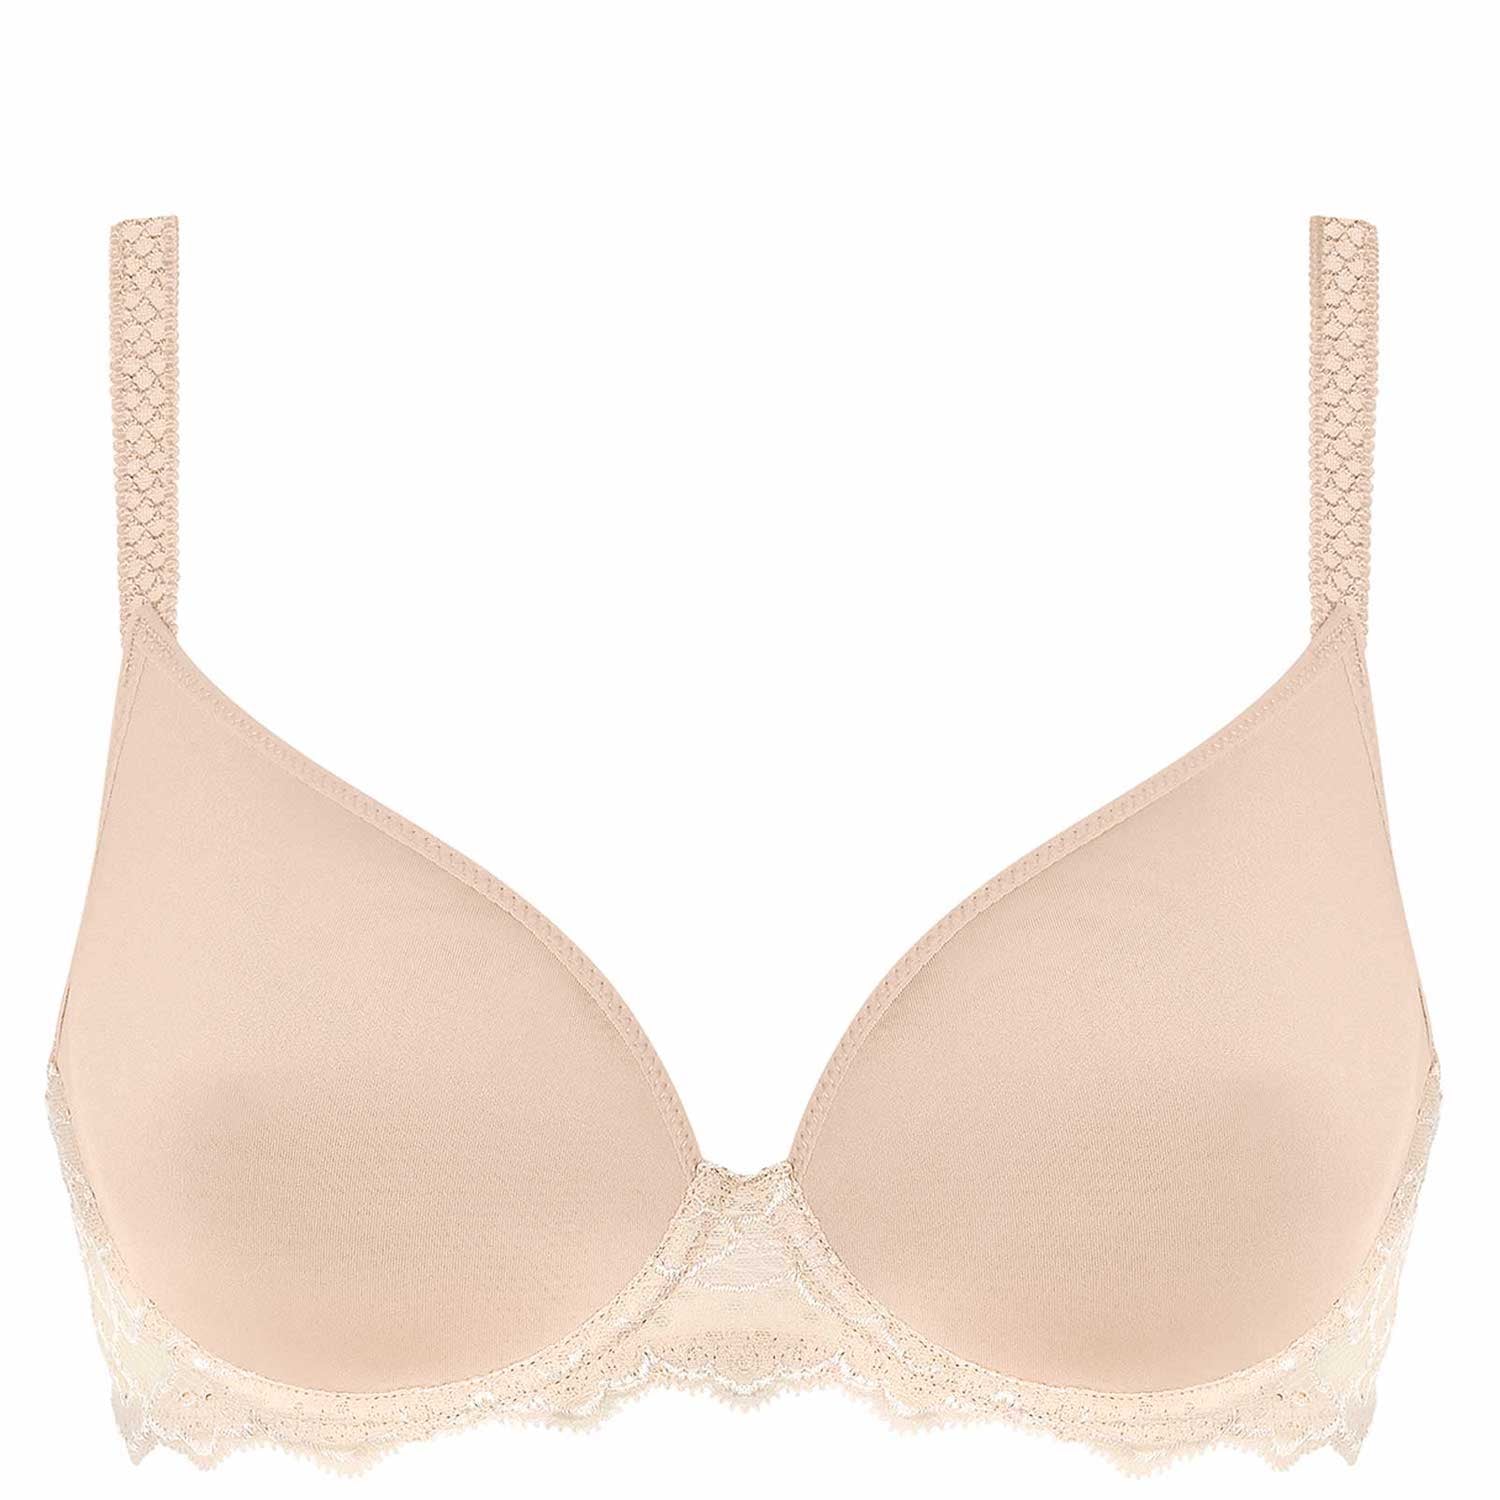 ELOMI - FREE EXPRESS SHIPPING -Charley Moulded Spacer Bra- Ballet Pink